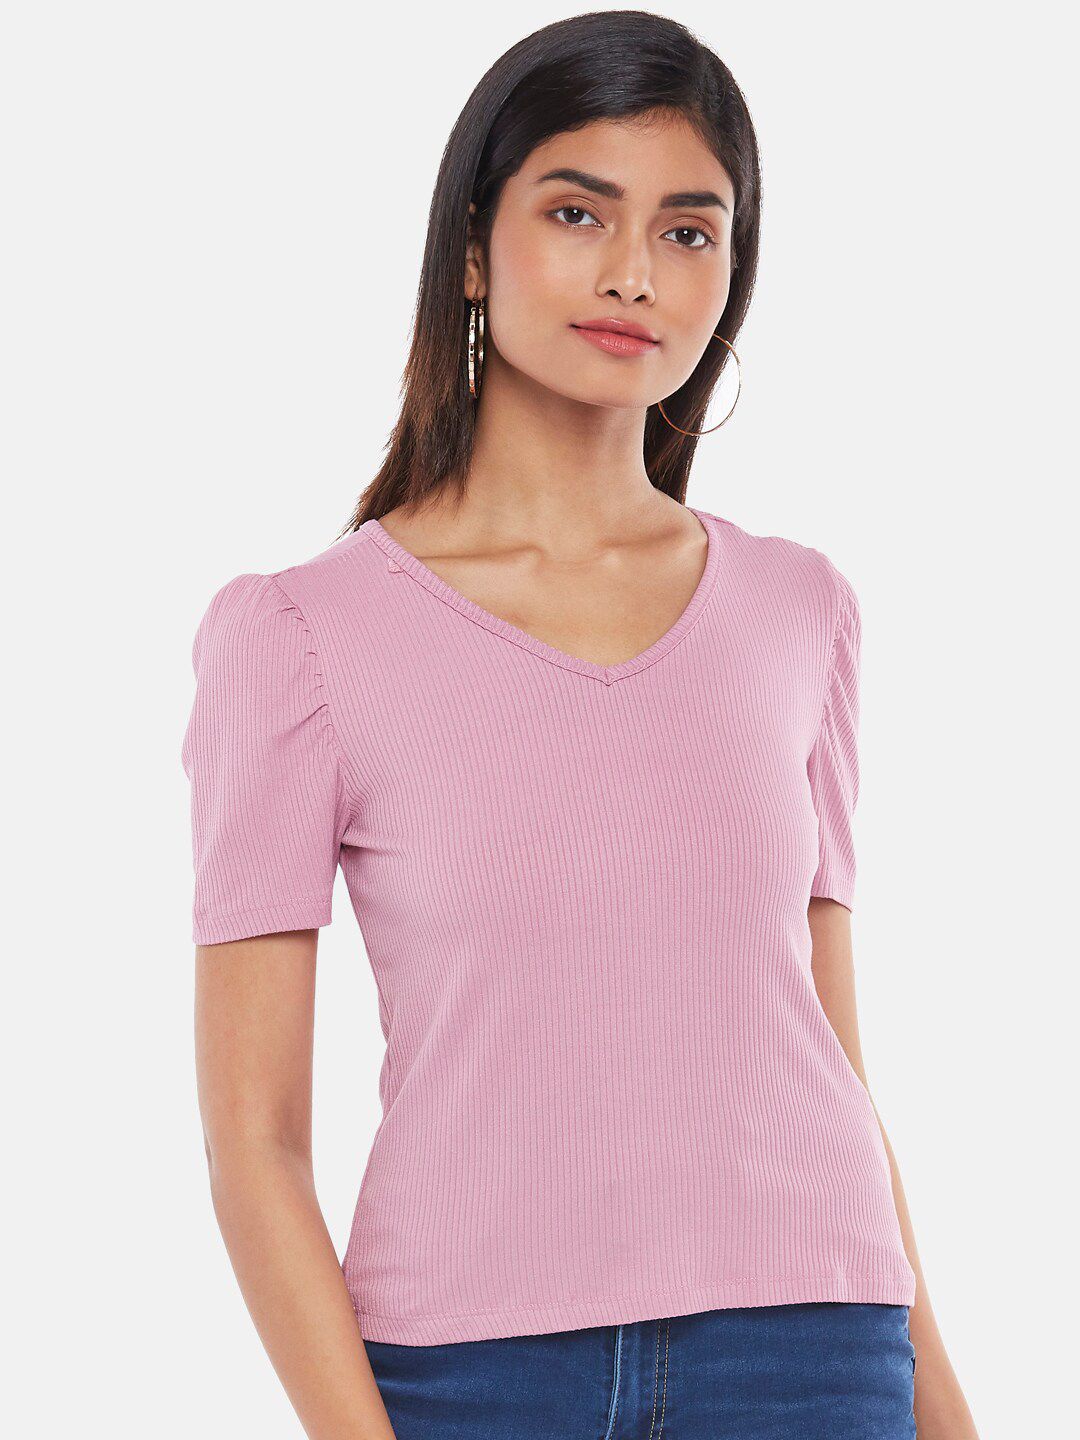 Honey by Pantaloons Pink Striped Top Price in India